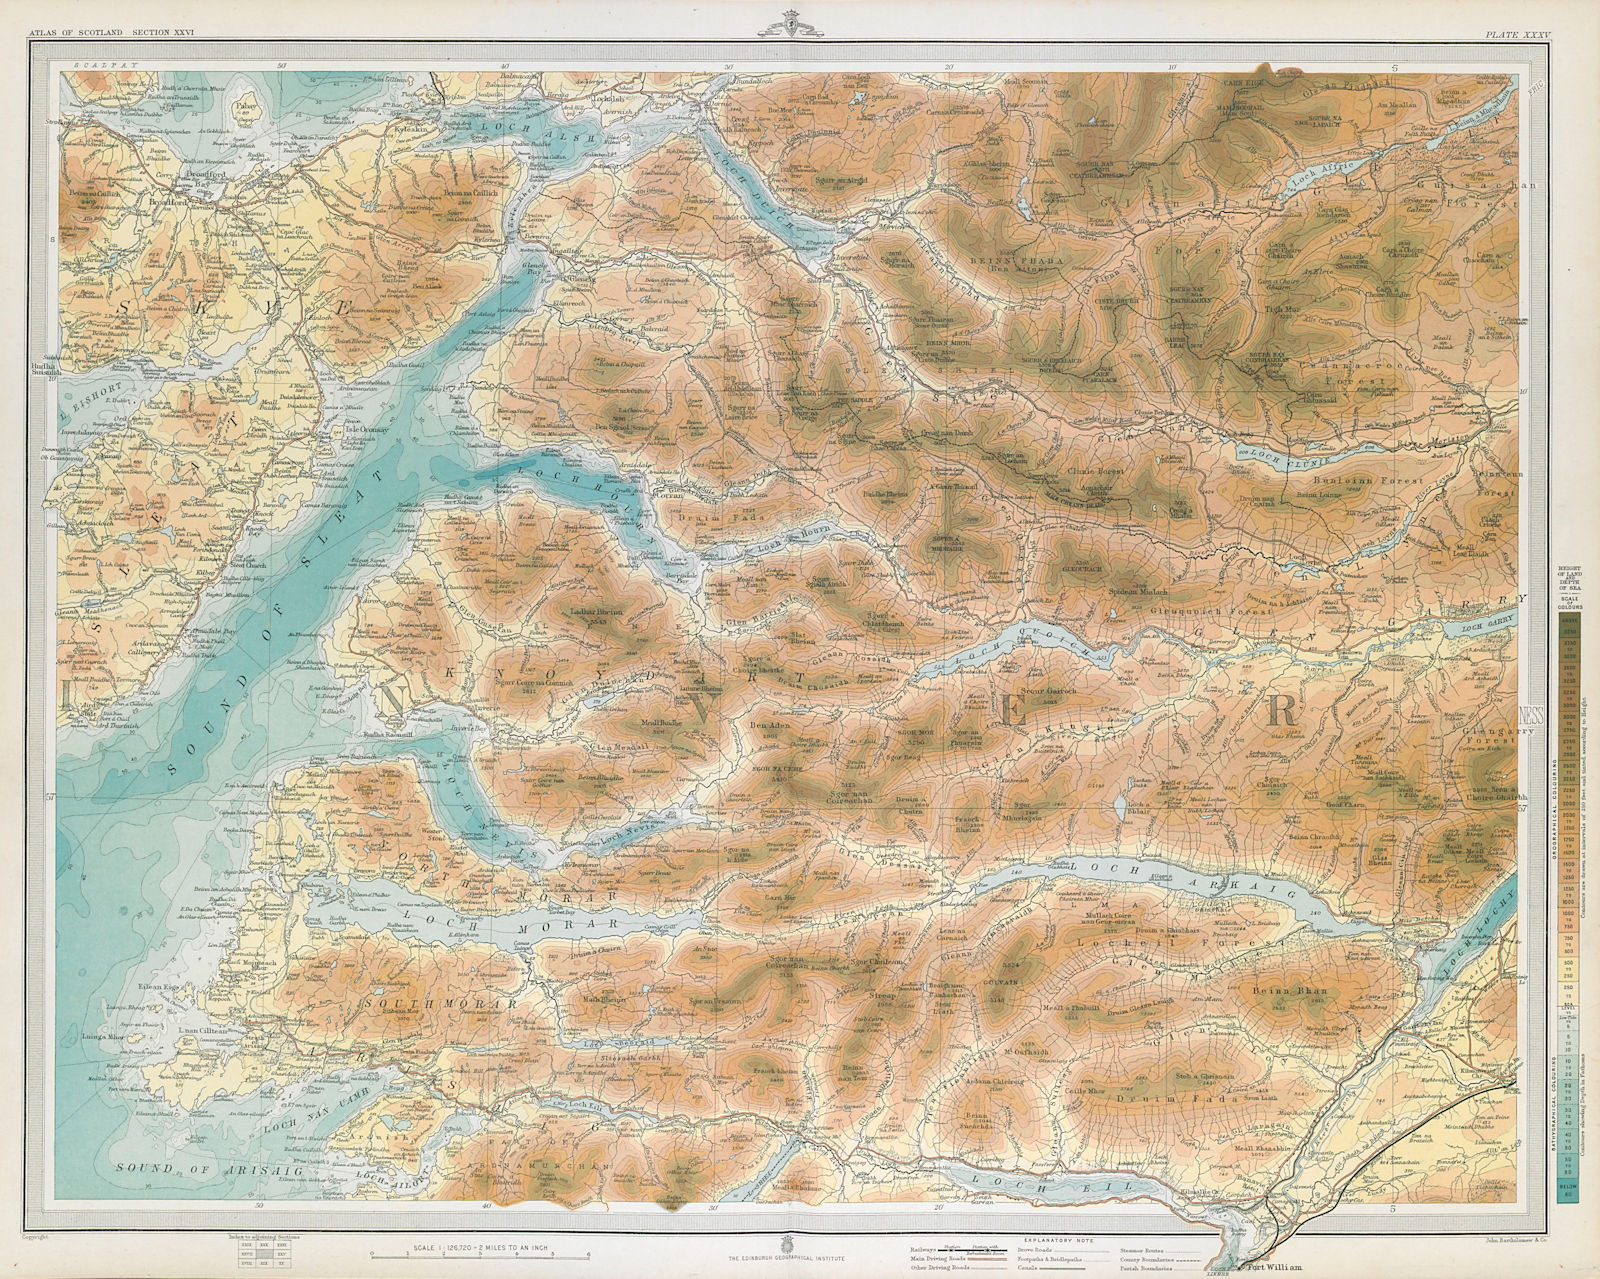 Associate Product SCOTTISH HIGHLANDS. Invernessshire Fort William Sound of Sleat. LARGE 1895 map